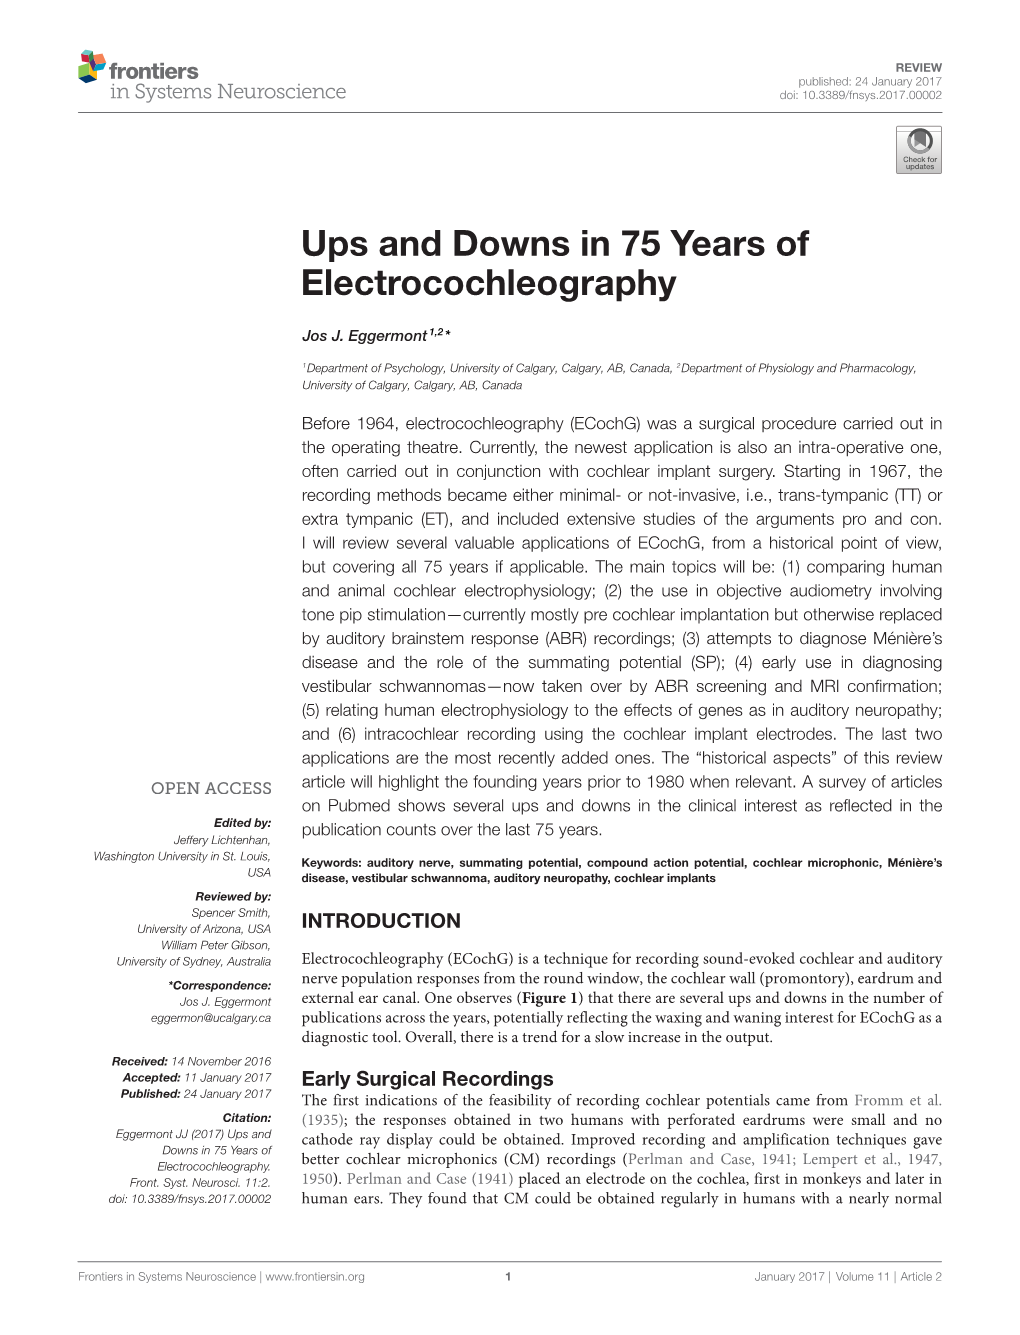 Ups and Downs in 75 Years of Electrocochleography